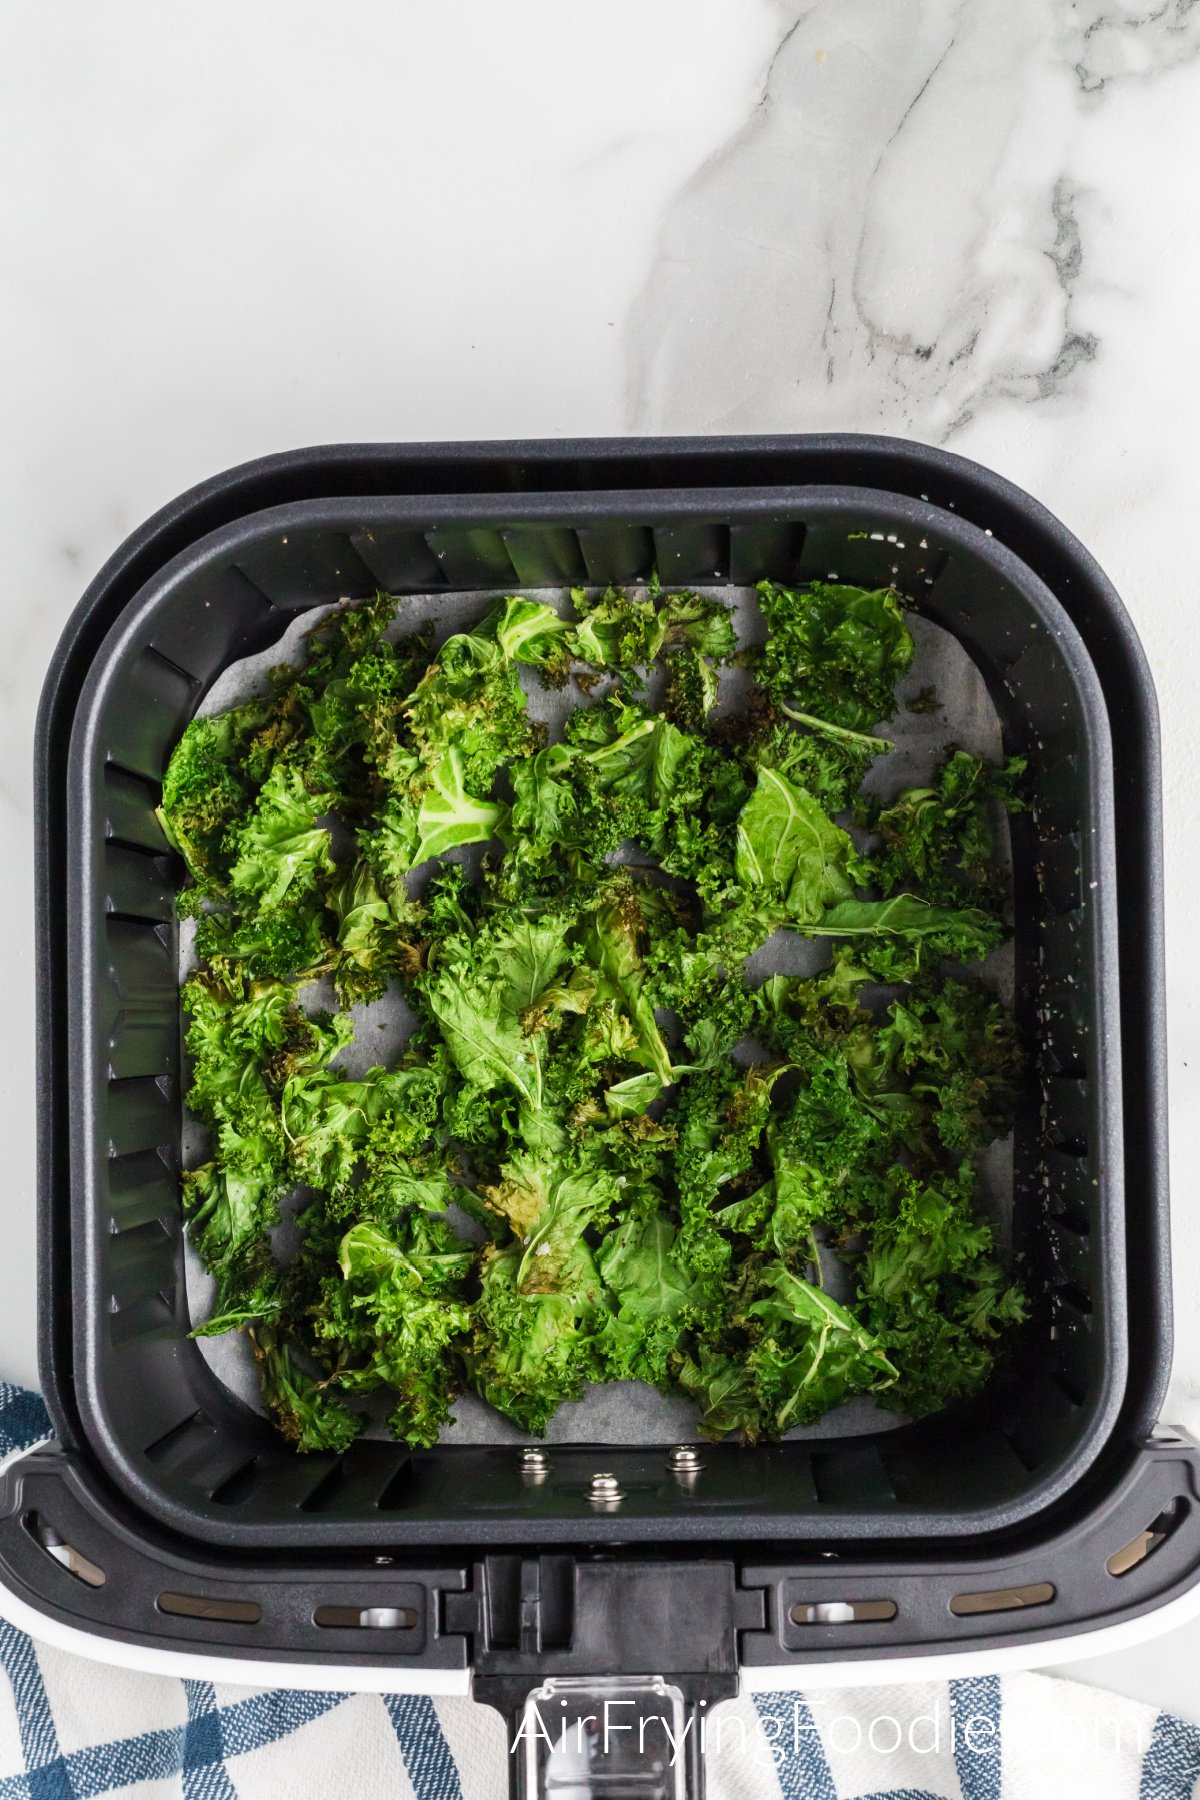 A picture of the kale fully cooked in the air fryer basket.